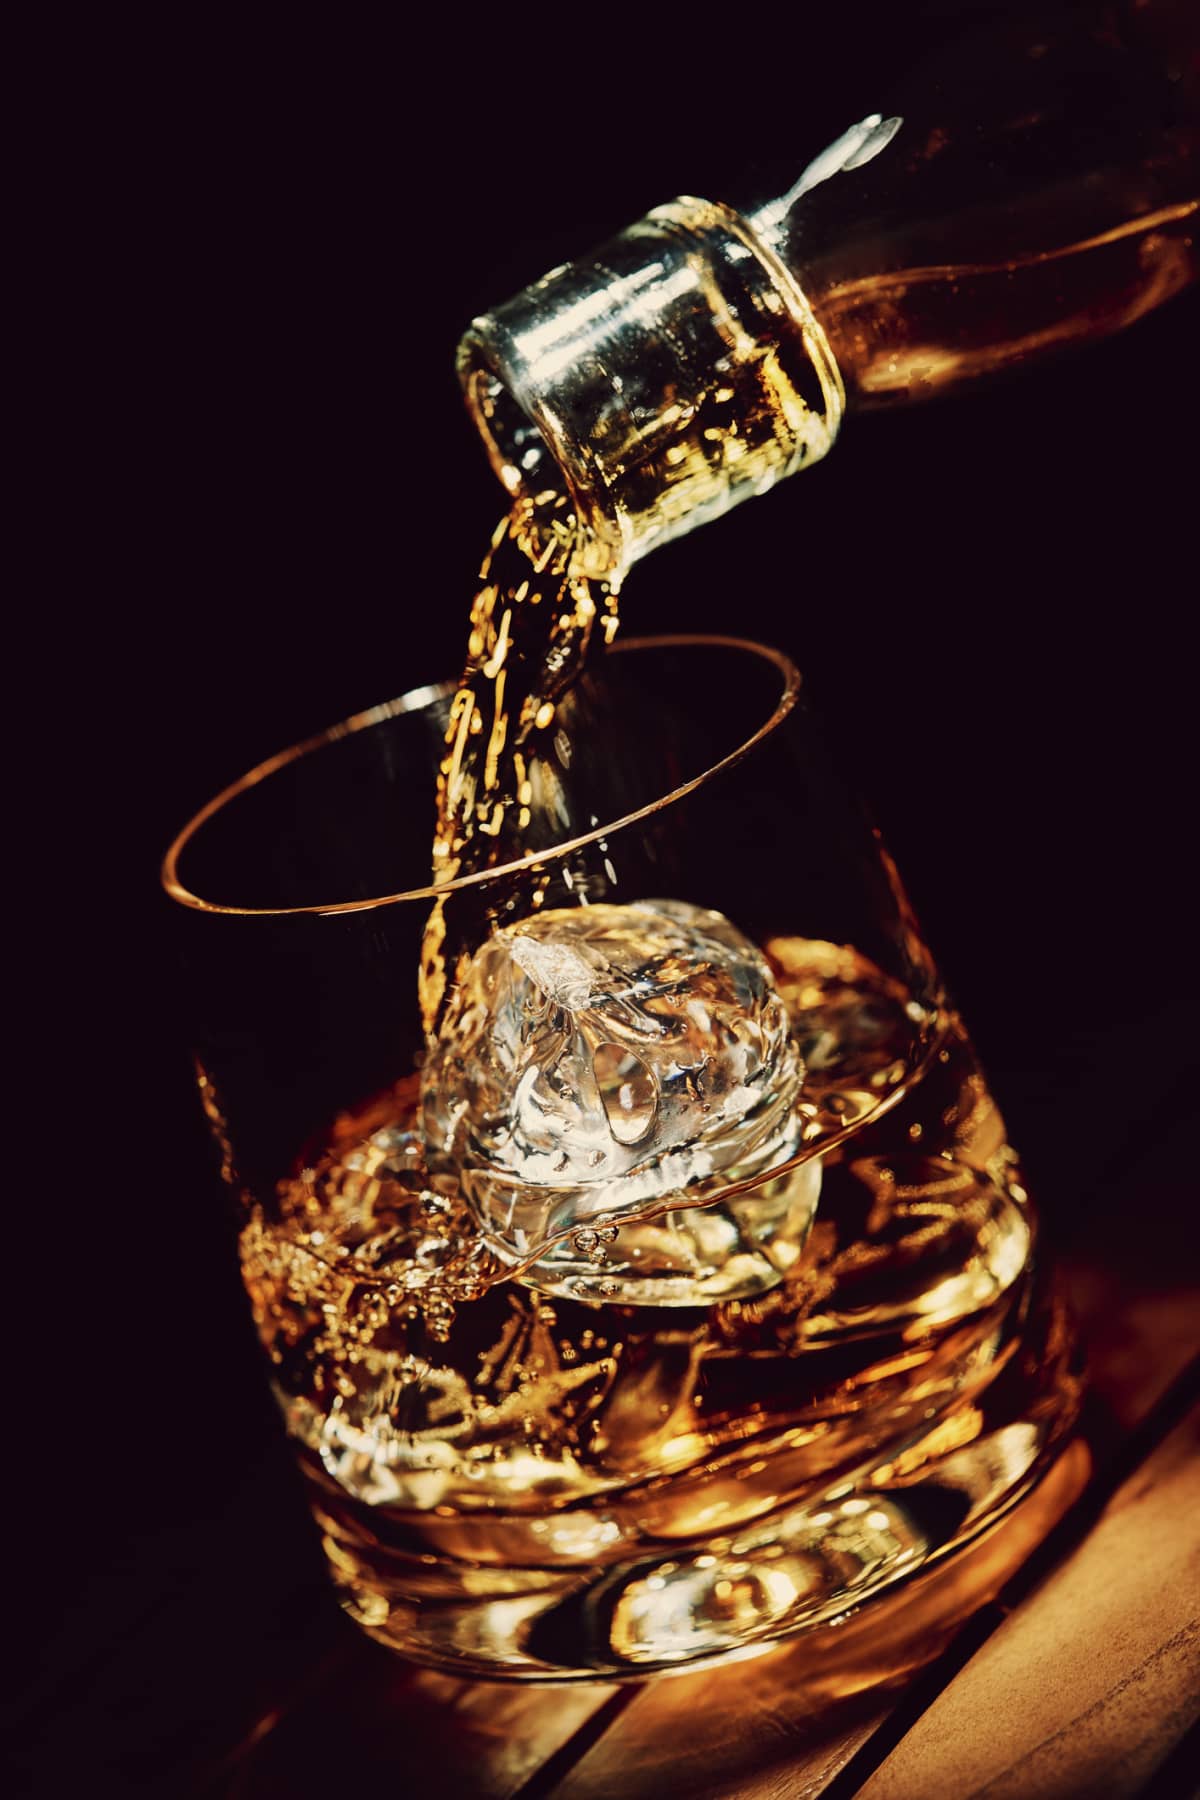 This is a close up photo of whiskey or bourbon splashing out of a shot glass surrounded by ice cubes on a black reflective surface Taken in the studio. This image was photographed at 1/8000th of a second completely freezing the splash.  There is a warm golden light giving it a classy feel with a glow in the background.